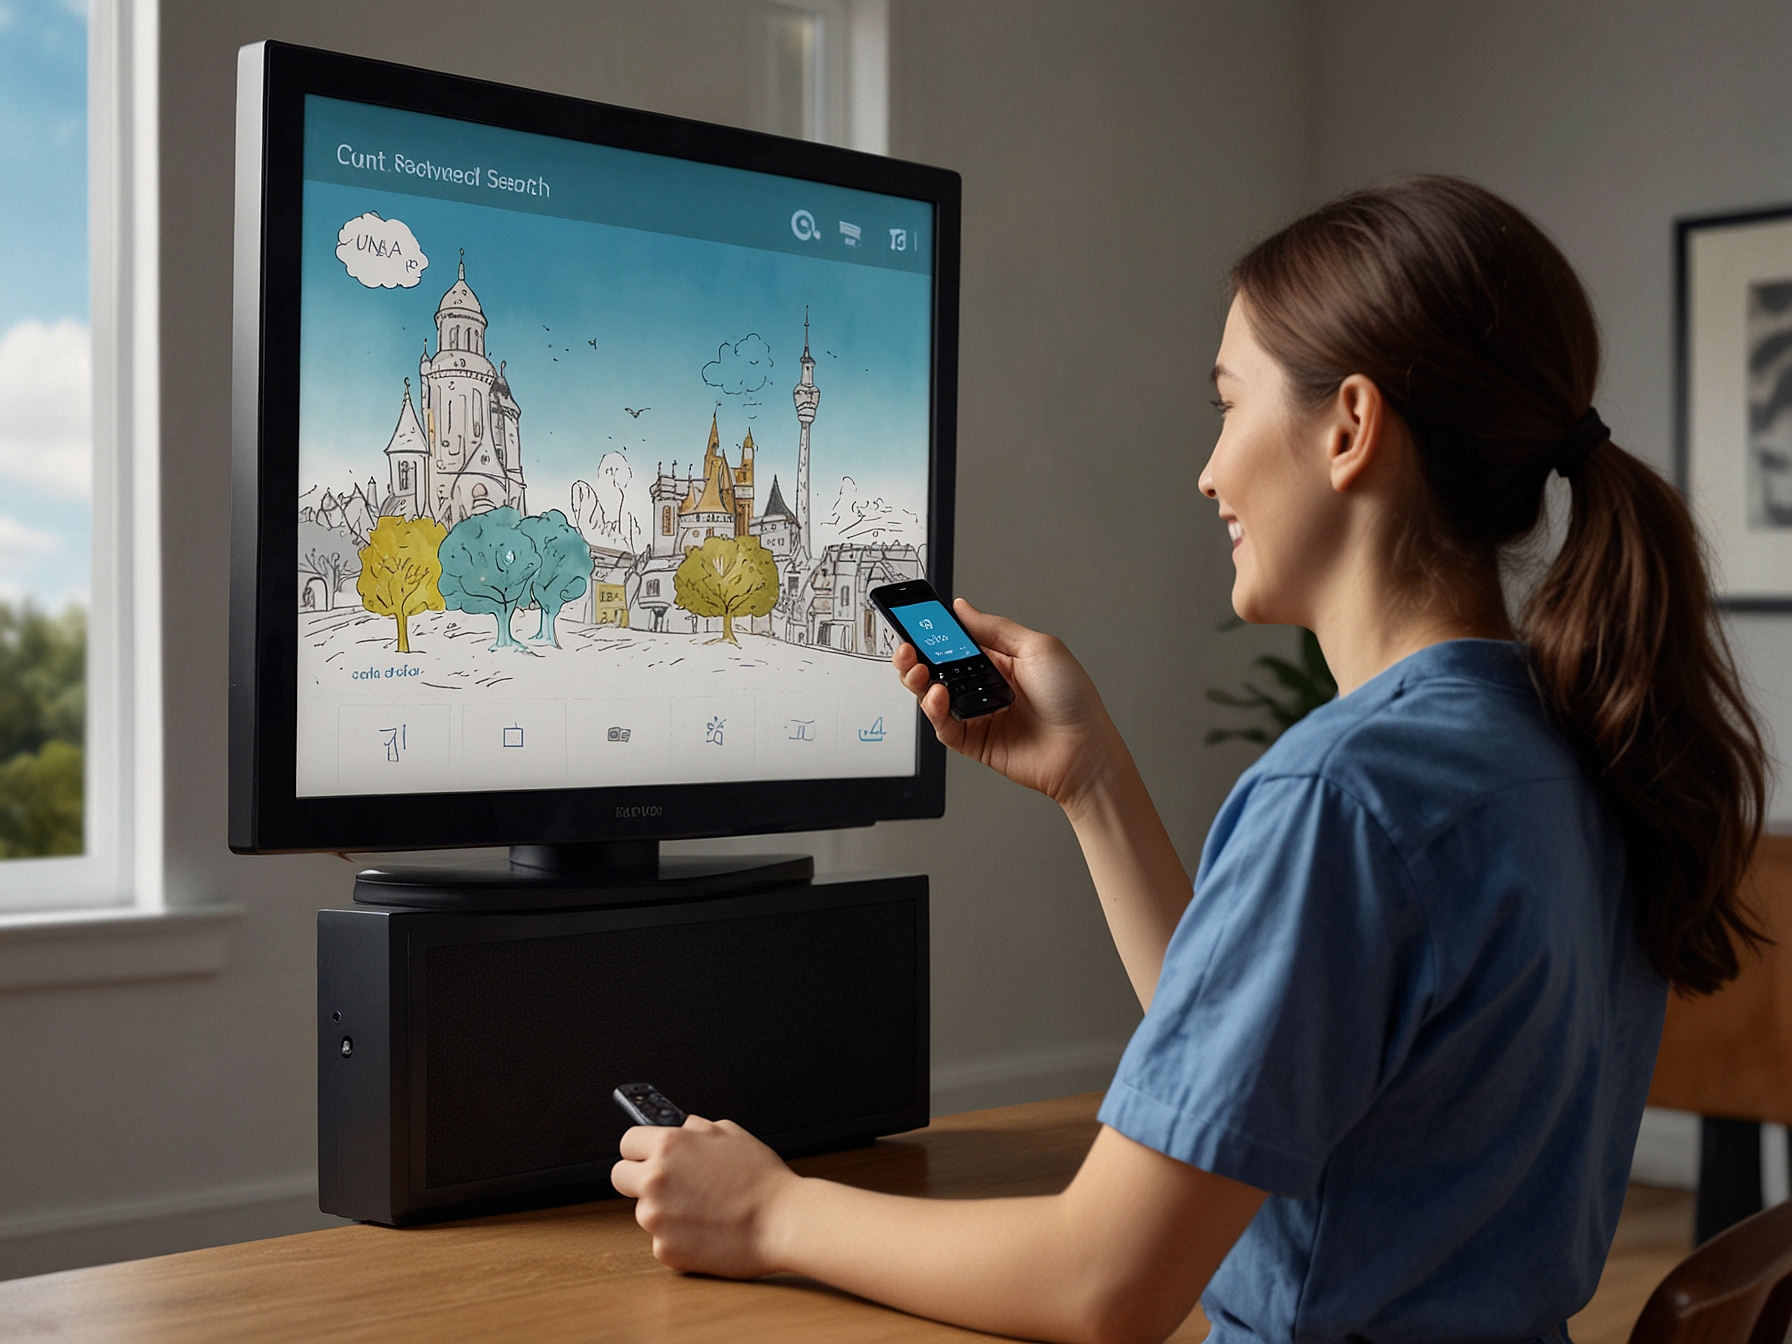 An image showing a user engaging with the enhanced voice search feature on a Sky remote control, demonstrating the ease and accuracy of finding content quickly.